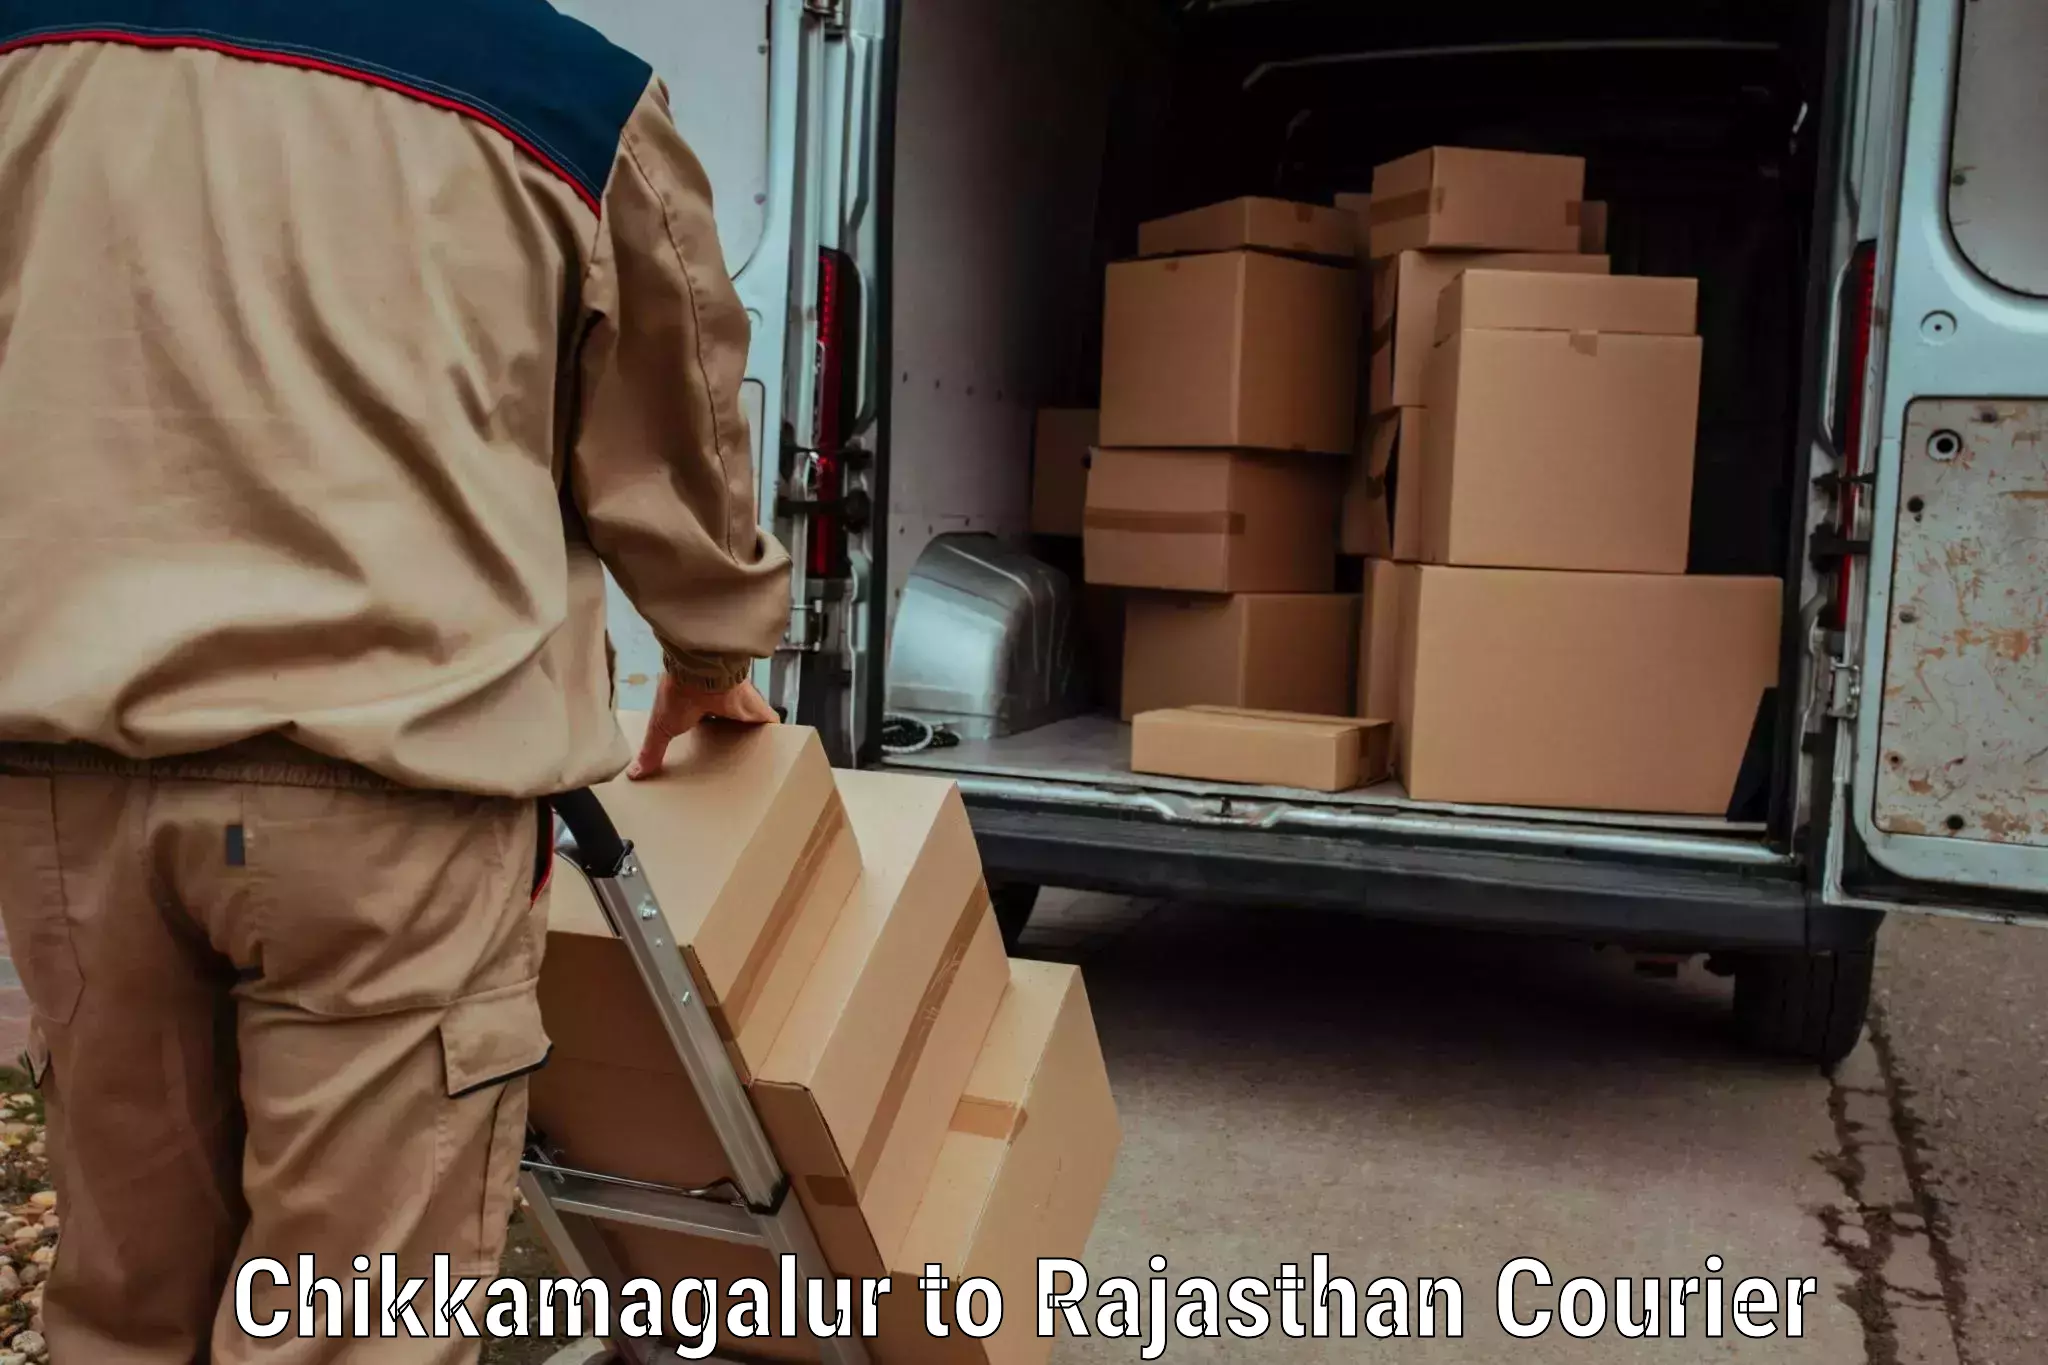 Next-day delivery options Chikkamagalur to Laxmangarh